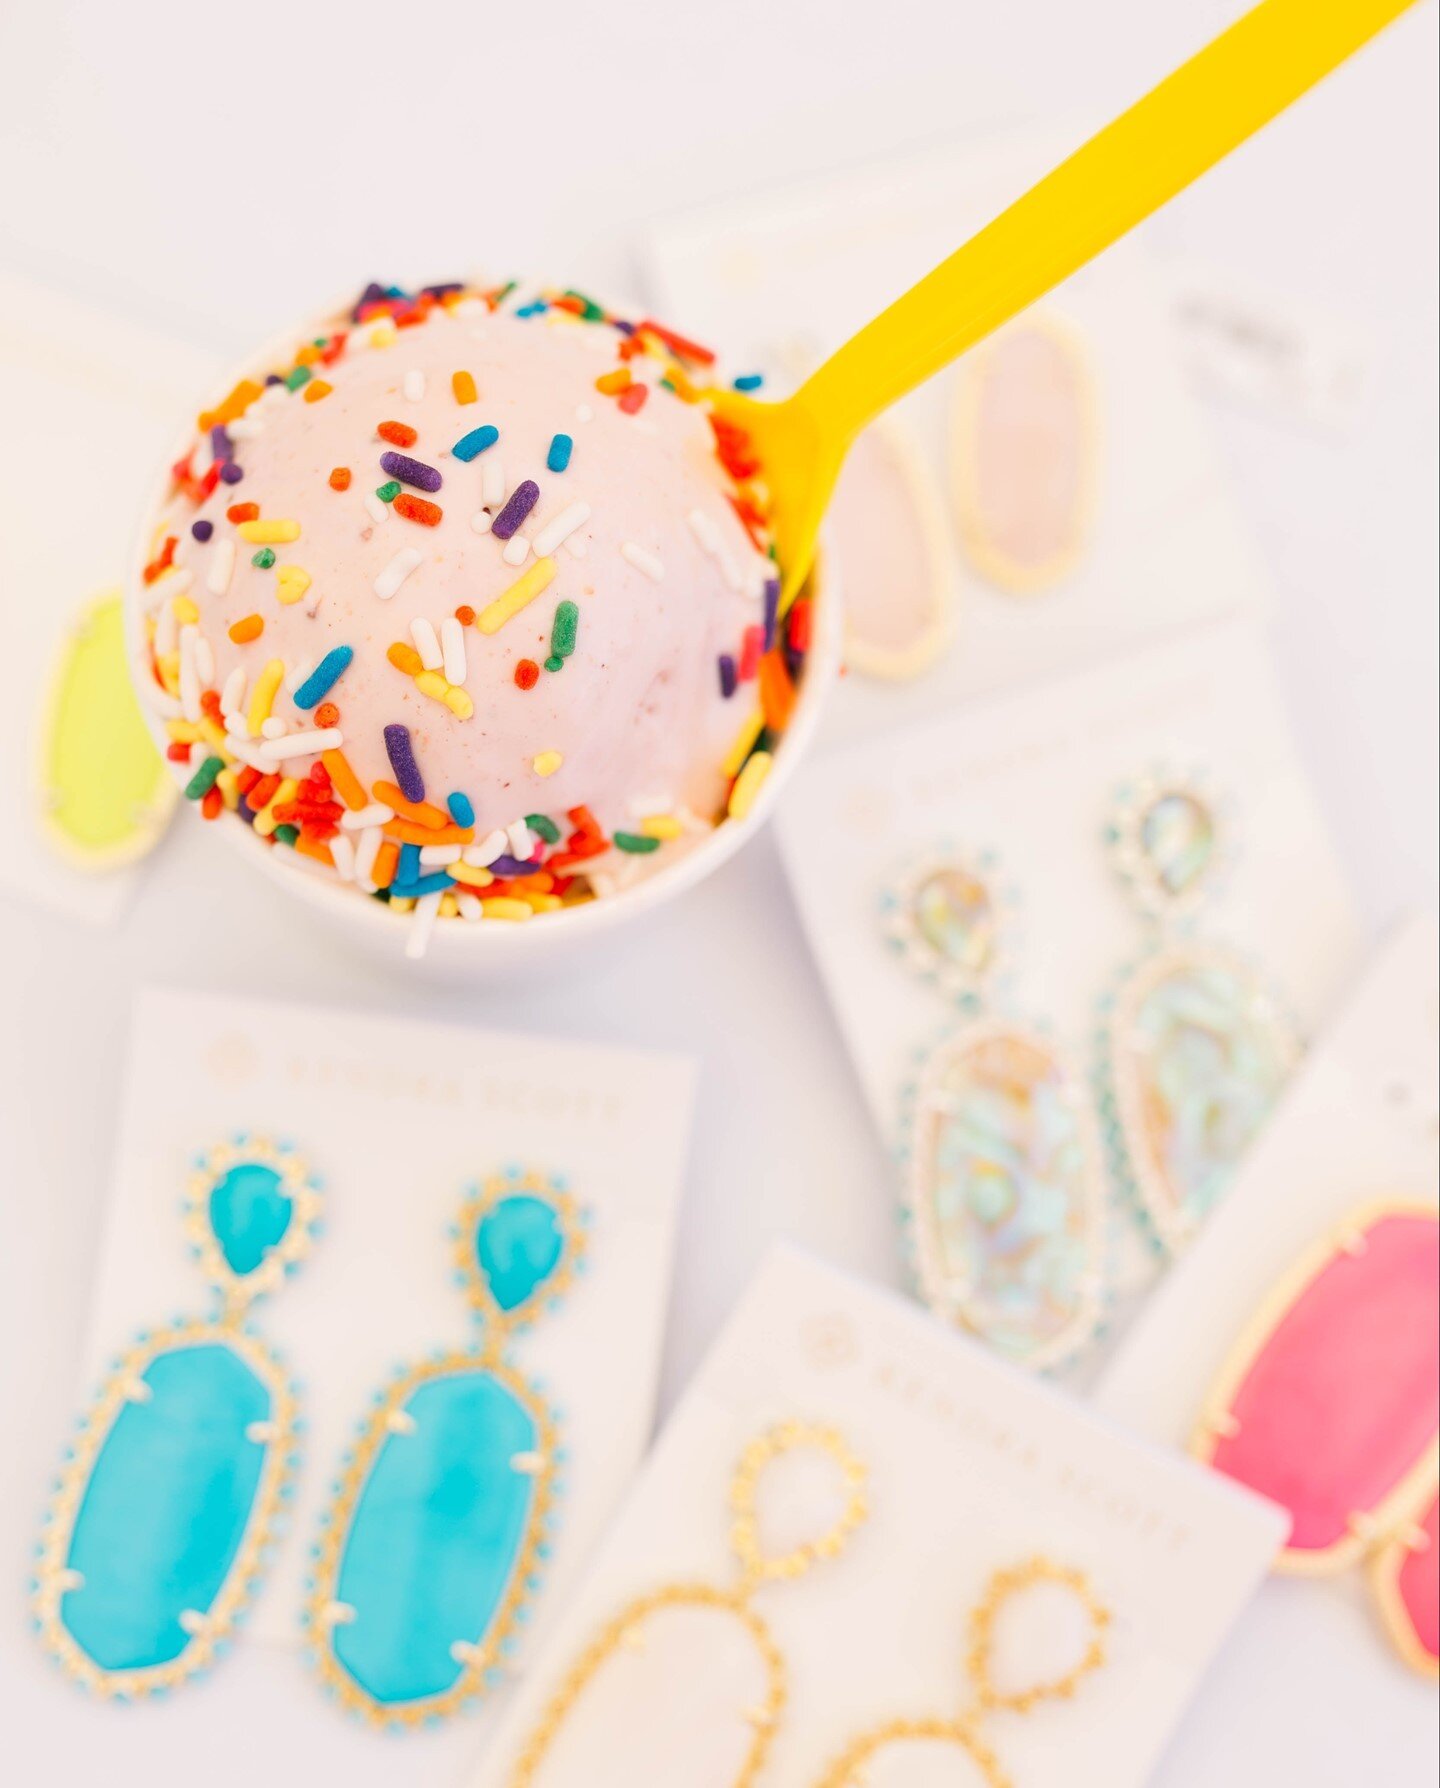 Shout out to our friends at @kendrascott for giving our ice cream lovers FREE scoops on National Ice Cream Day!
.
.
.
.
.
.
#kendrascott #sprinkles #weloveicecream #happyicecream #instanthappines #melticecreams